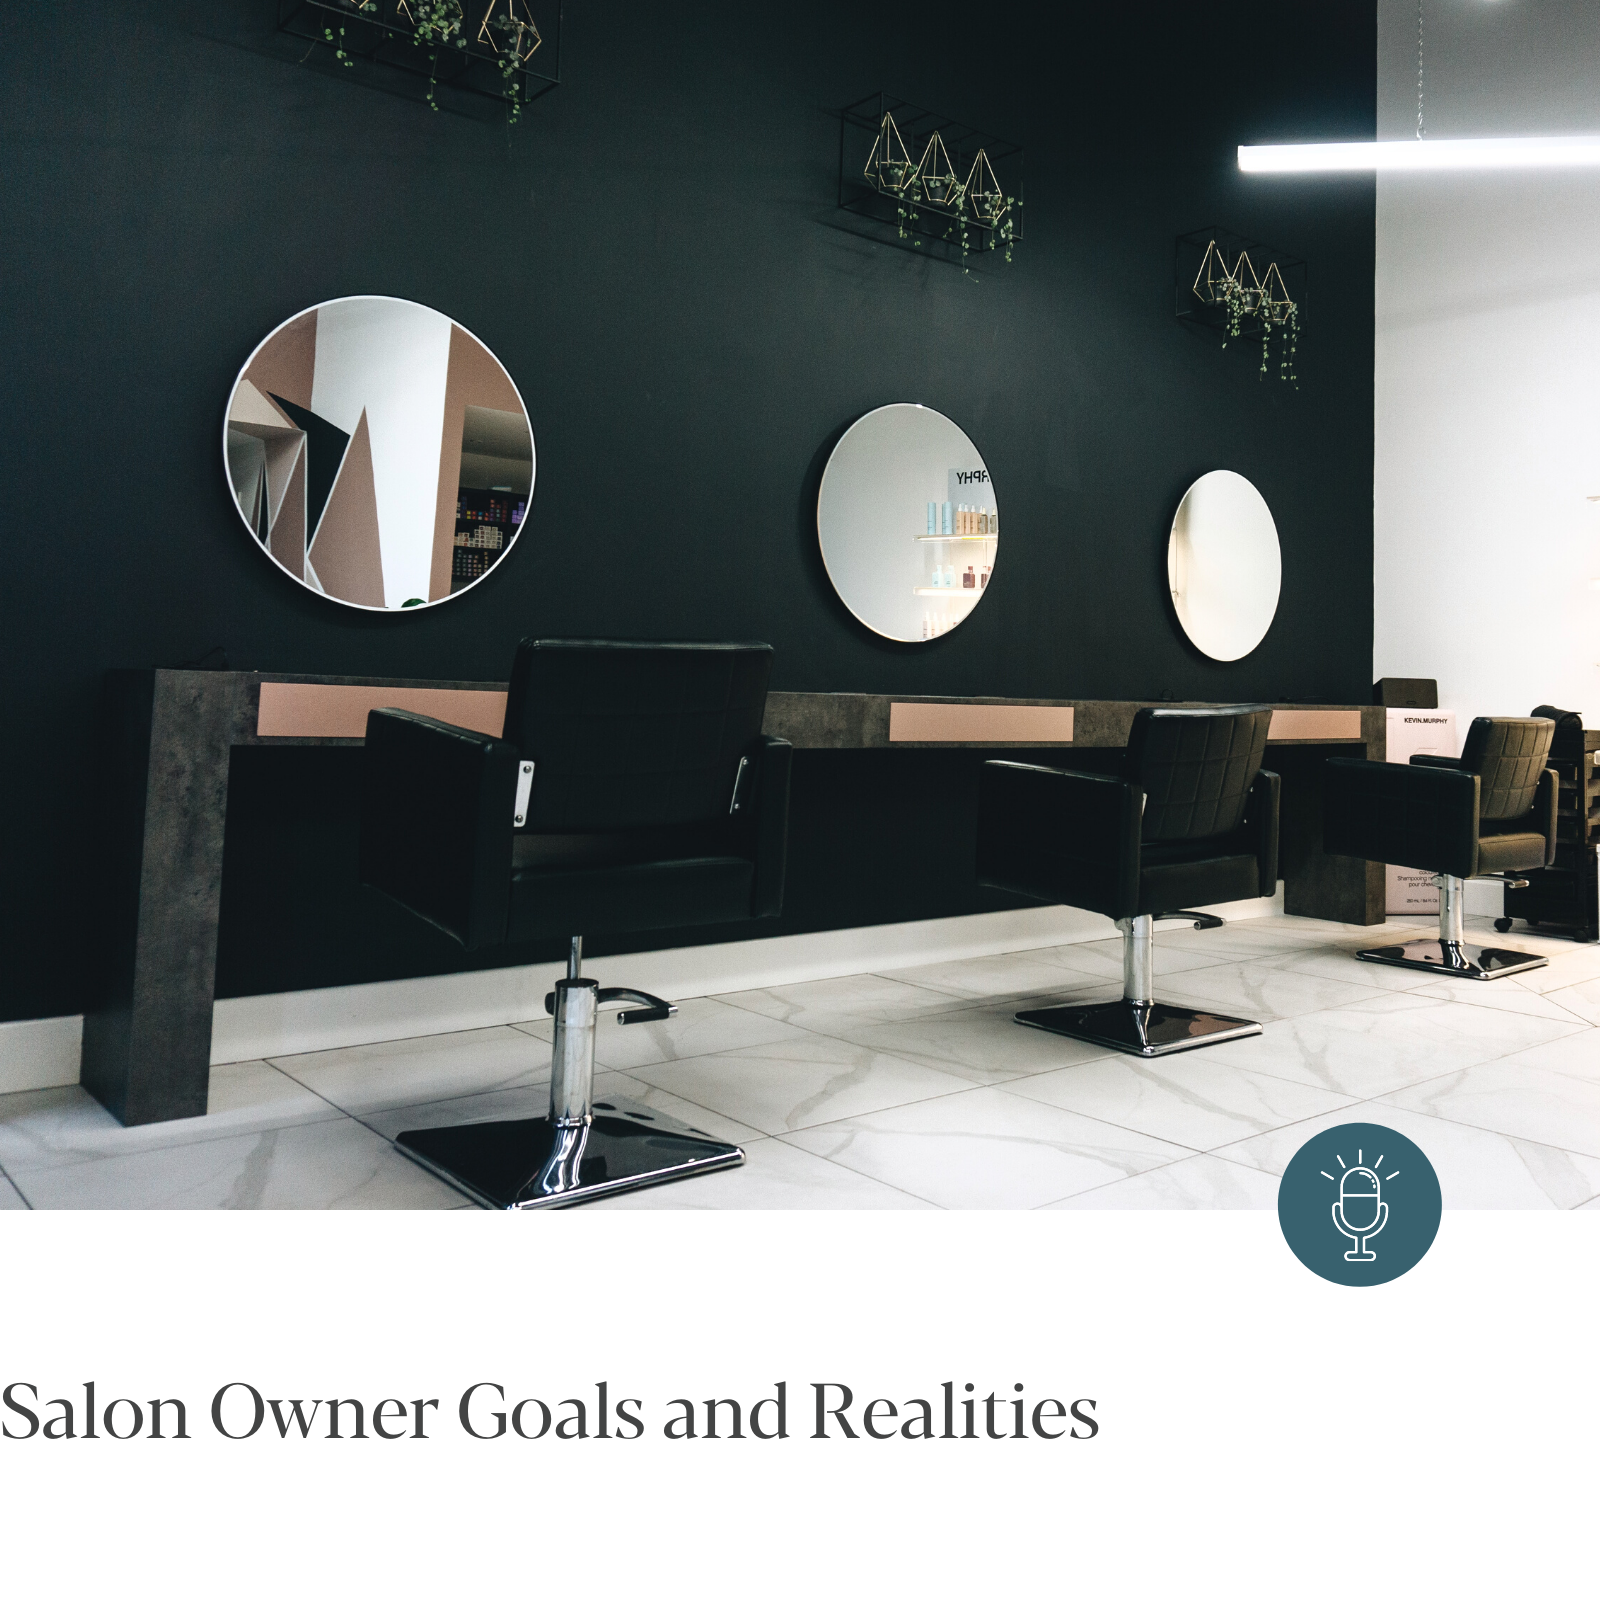 Episode #219 - Salon Owner Goals and Realities